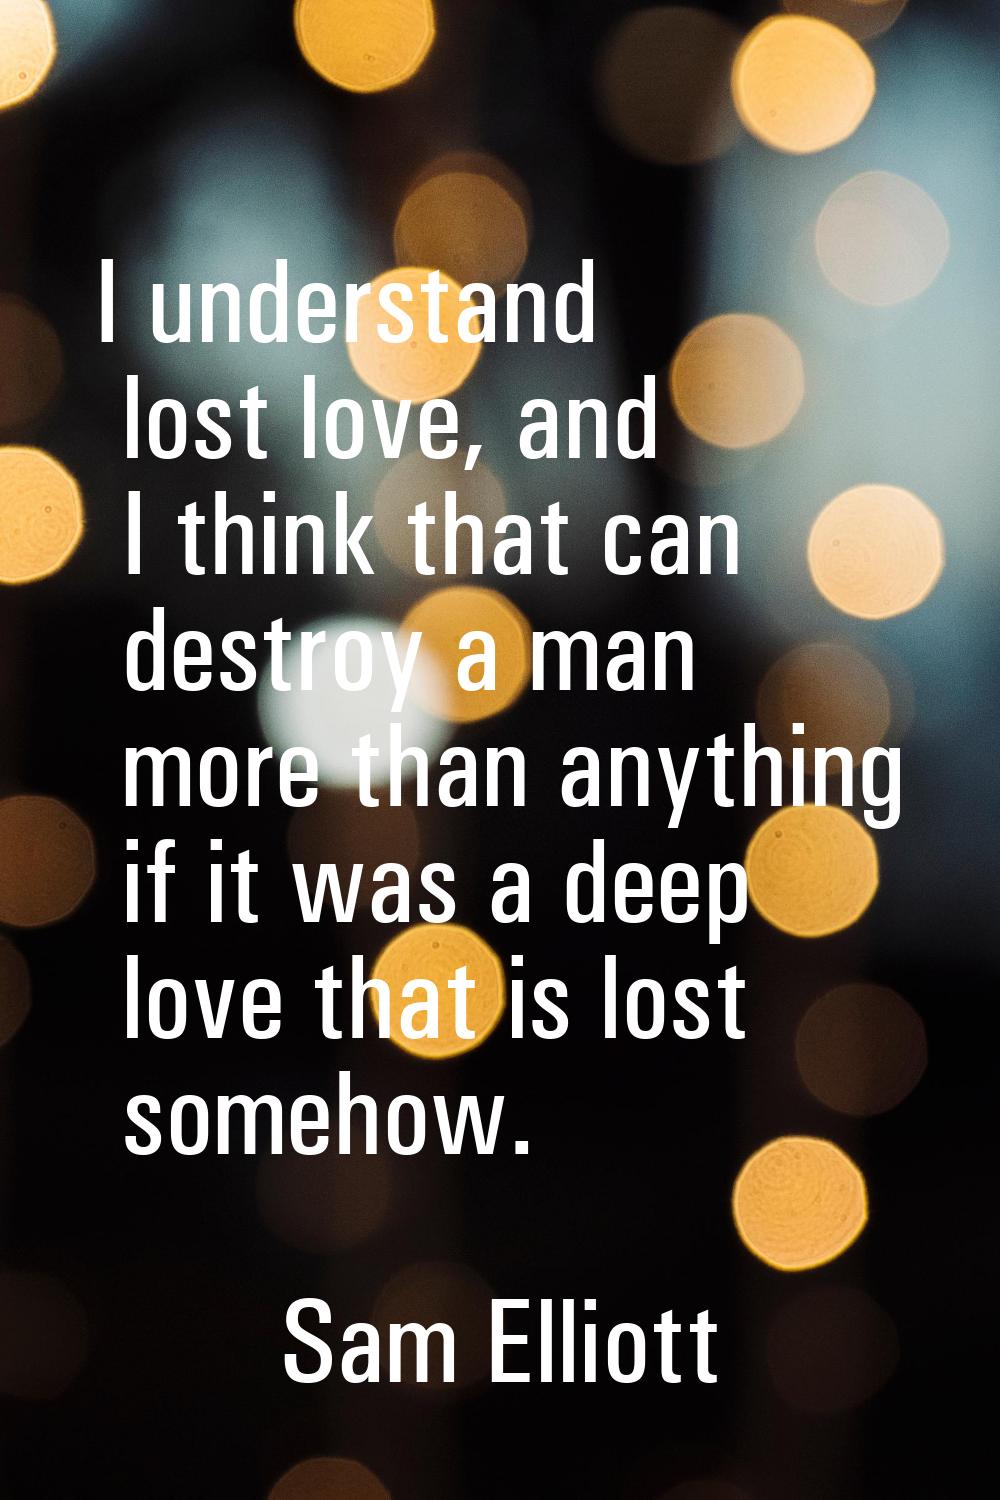 I understand lost love, and I think that can destroy a man more than anything if it was a deep love